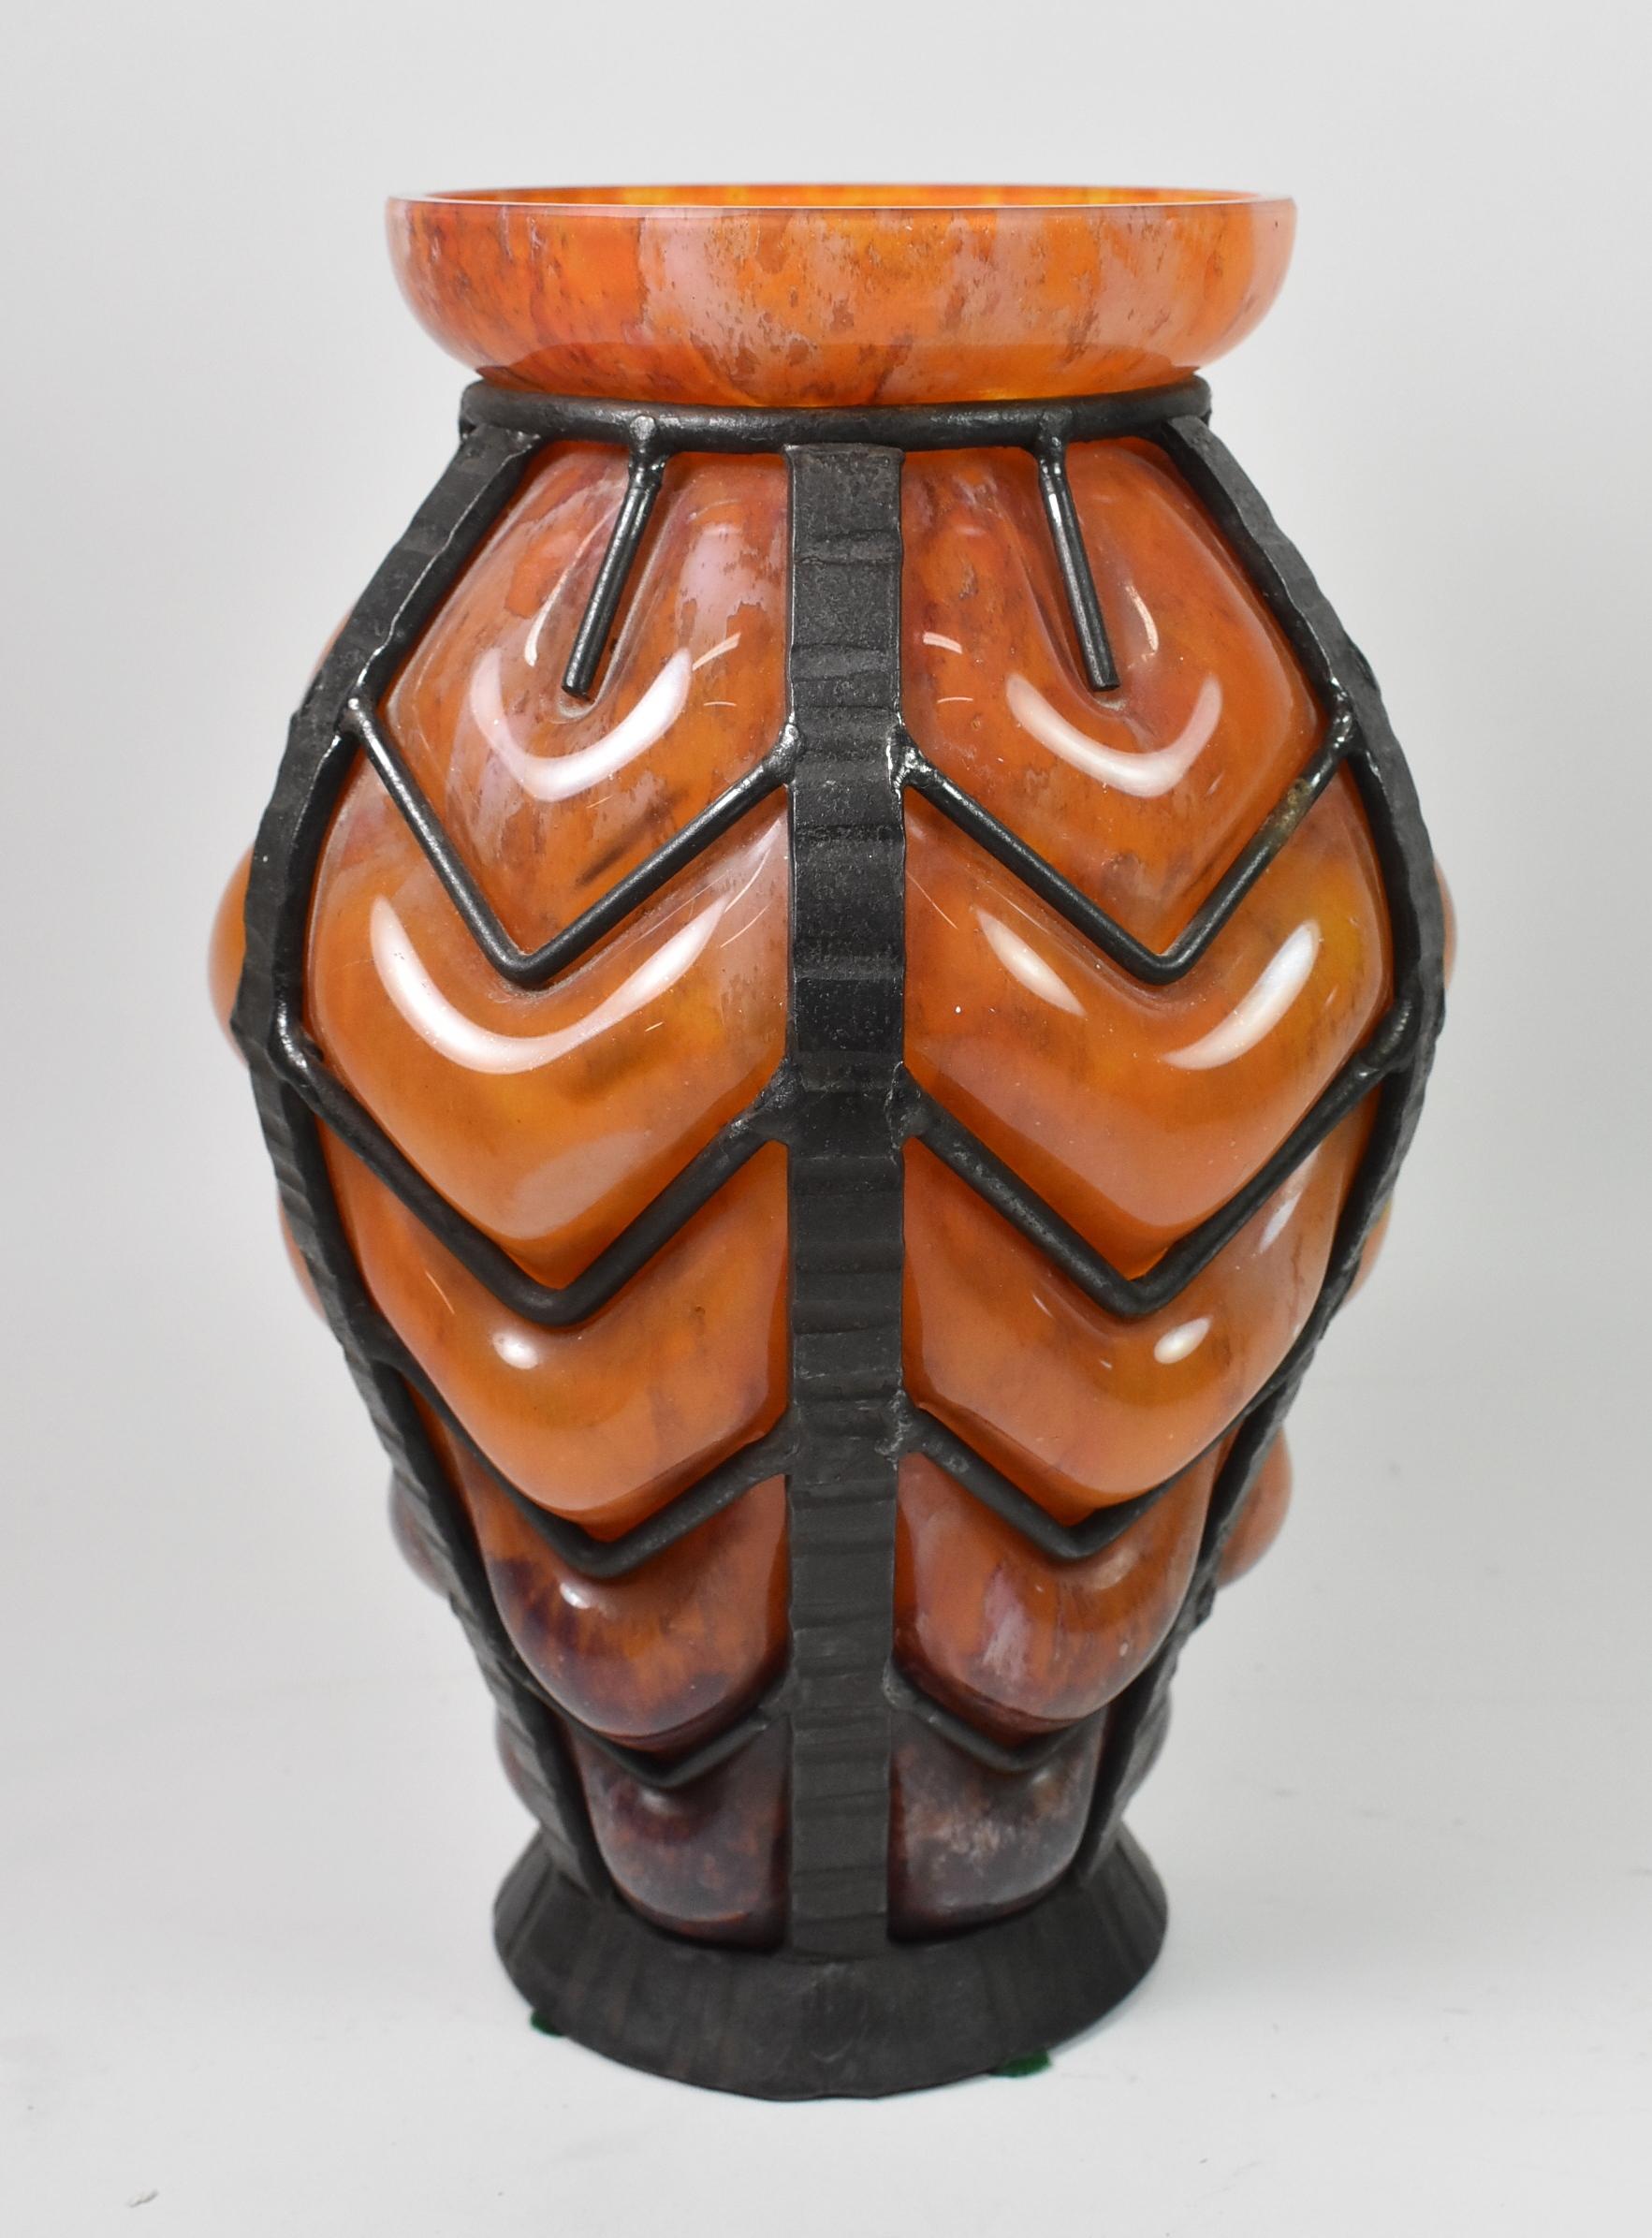 A Nancy Daum and Louis Majorelle Art Deco French art glass vase. This stunning vase features a blown glass vase in variegated shades of orange, with white and brown, encased with a hand fashioned wrought iron cage. Unsigned. Great condition, no